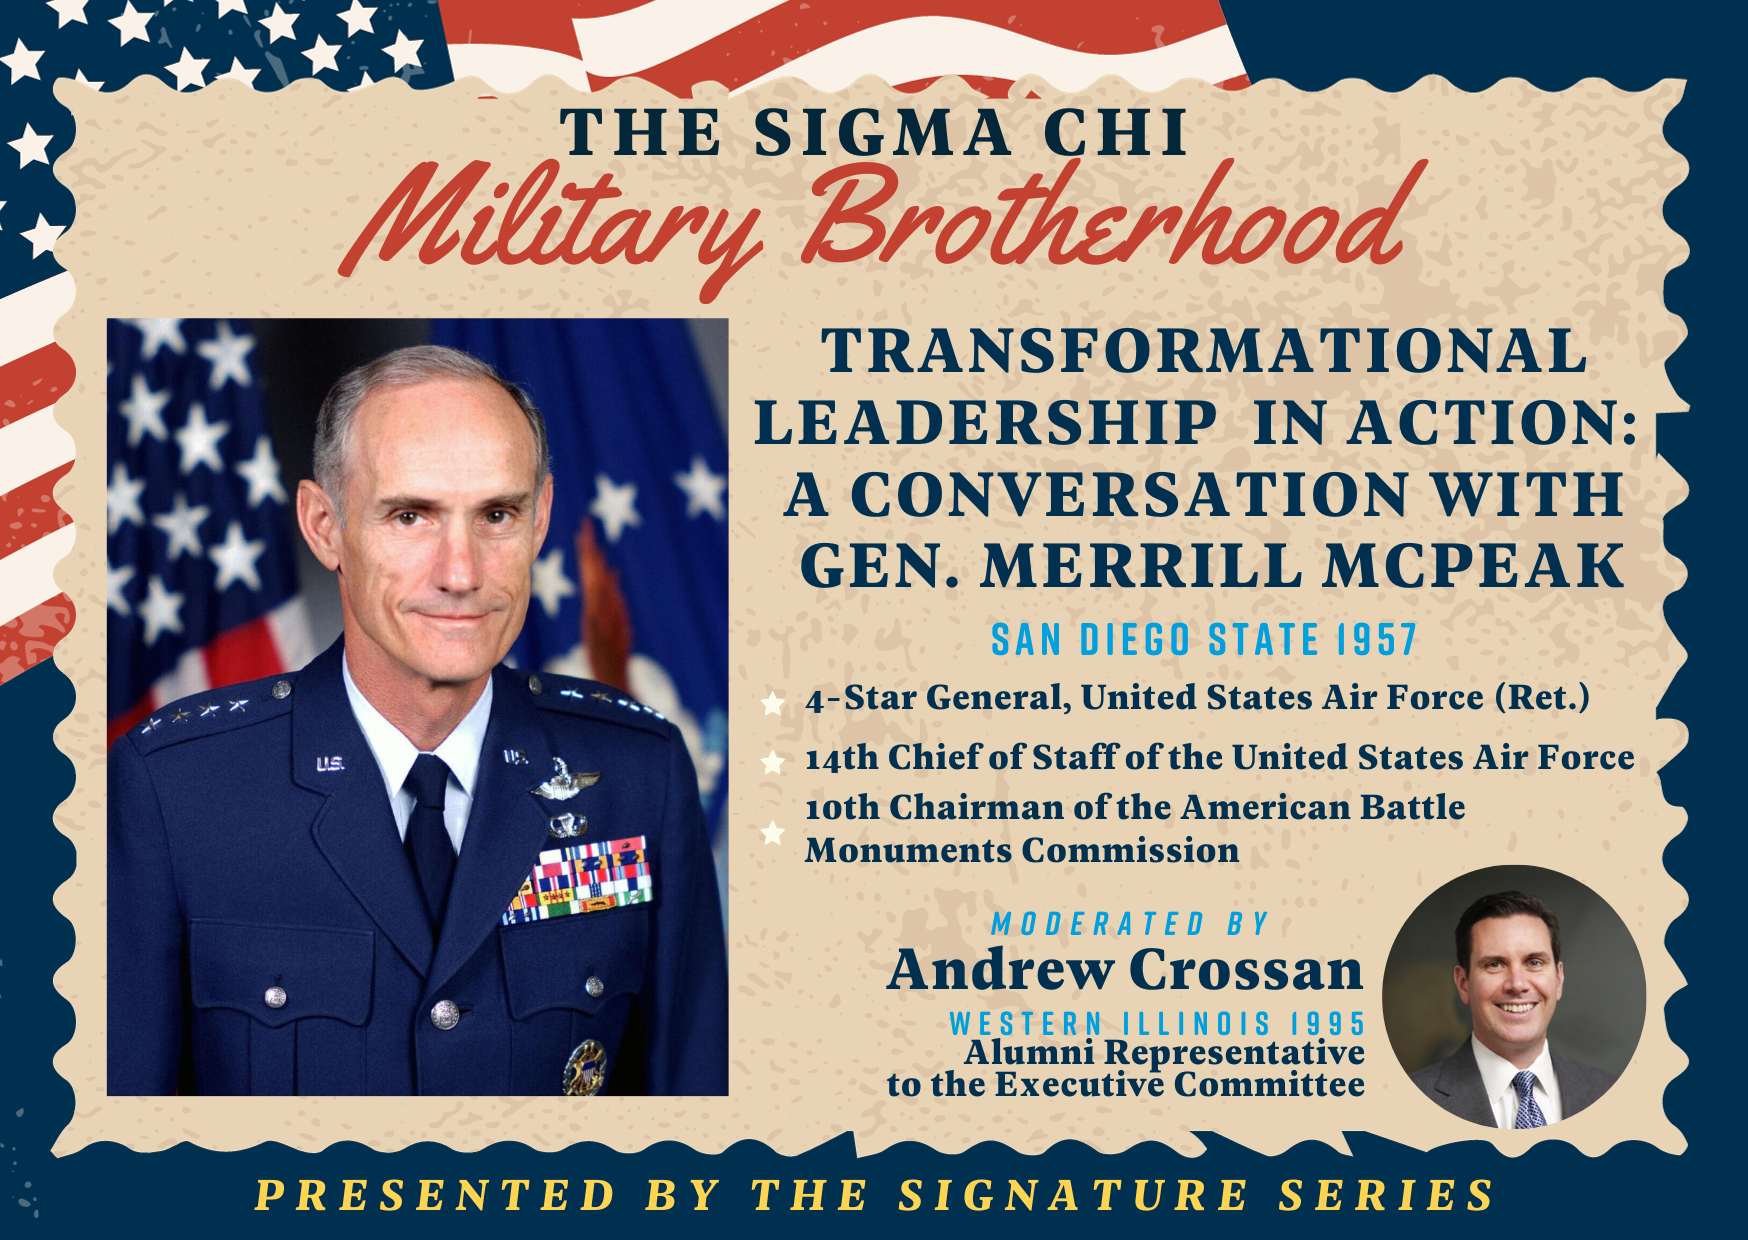 Image for Transformational Leadership  in Action:  A Conversation with Gen. Merrill McPeak webinar